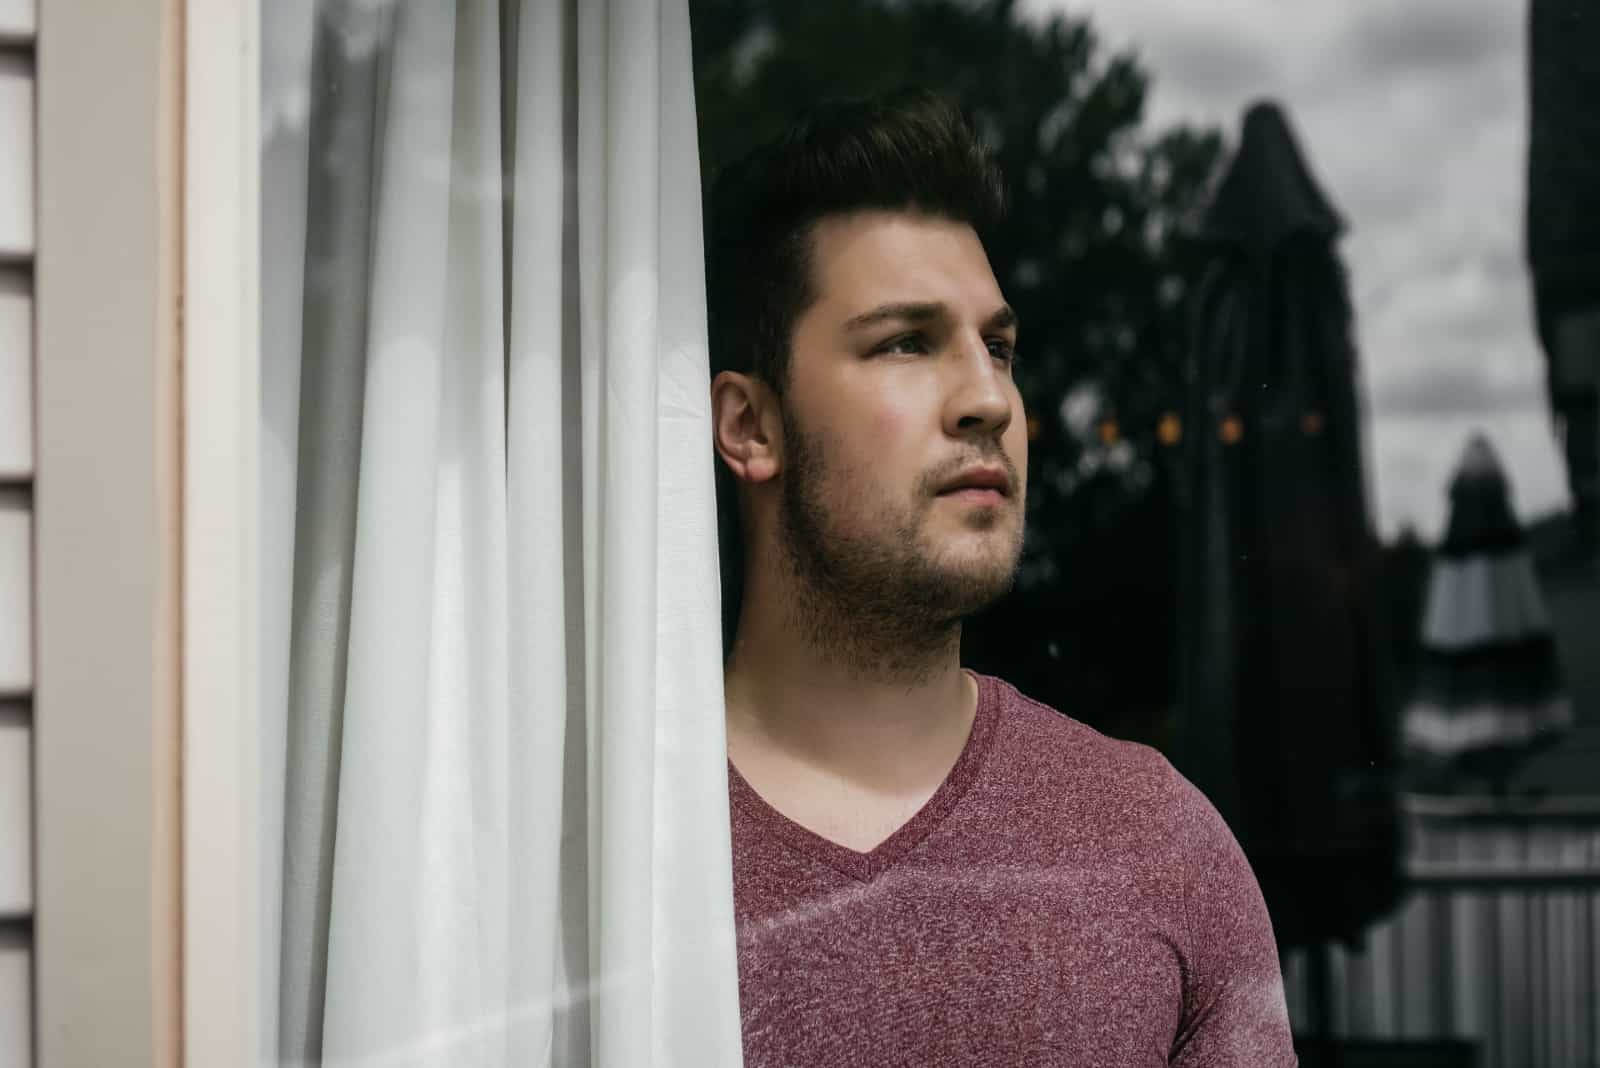 pensive man looking through window while standing near white curtain